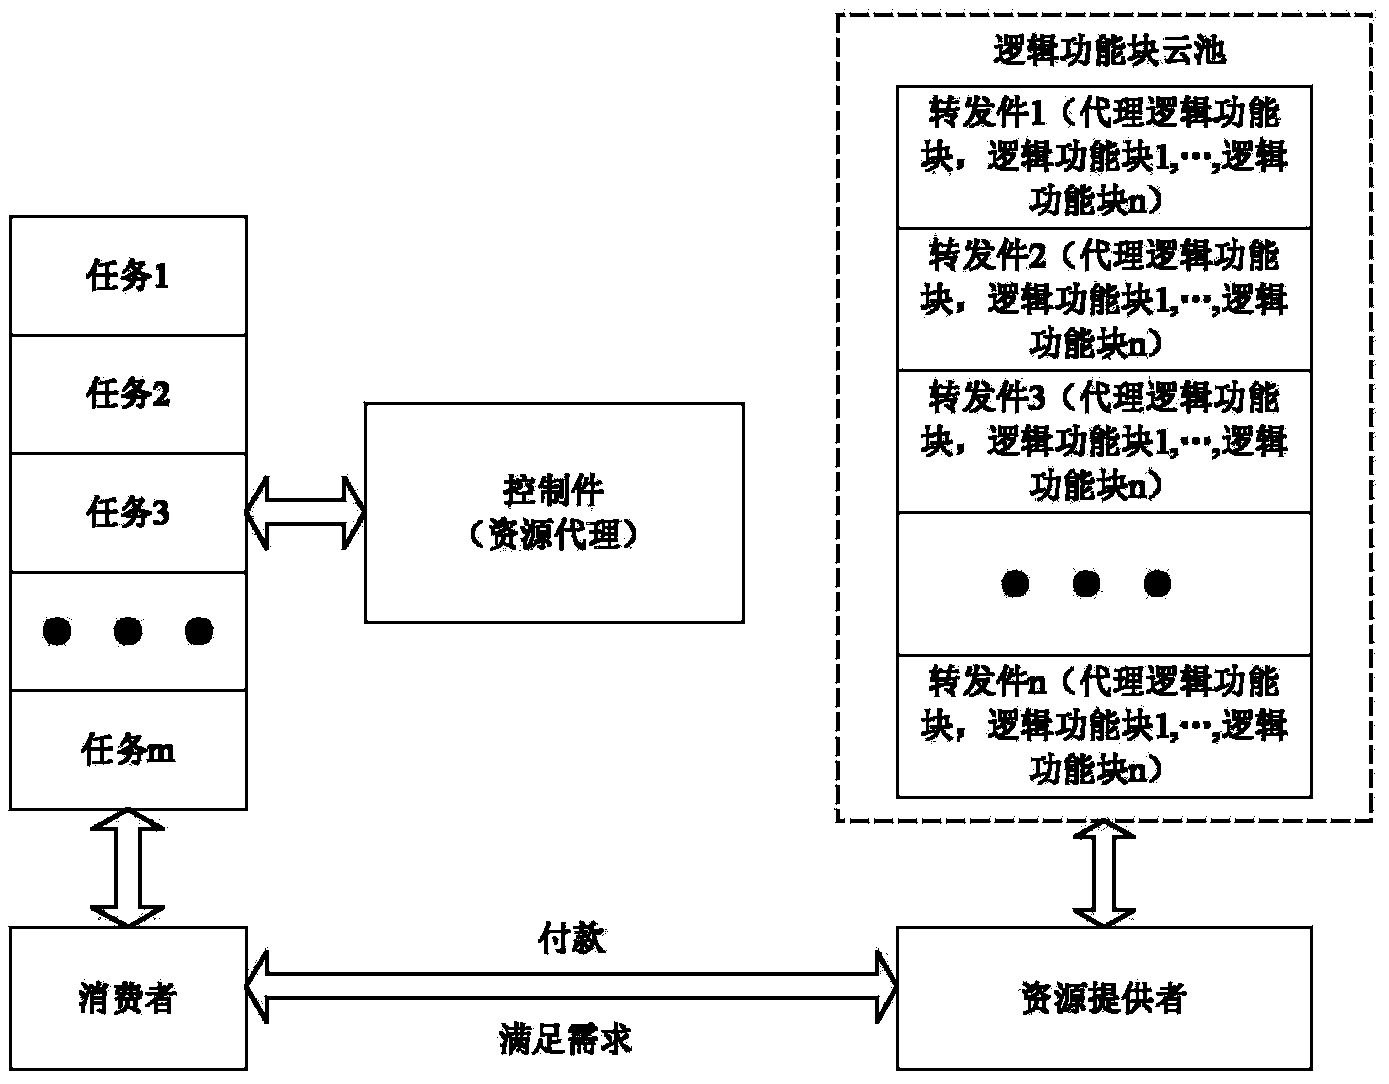 Resource scheduling method in forwarding and control separation network based on economic model